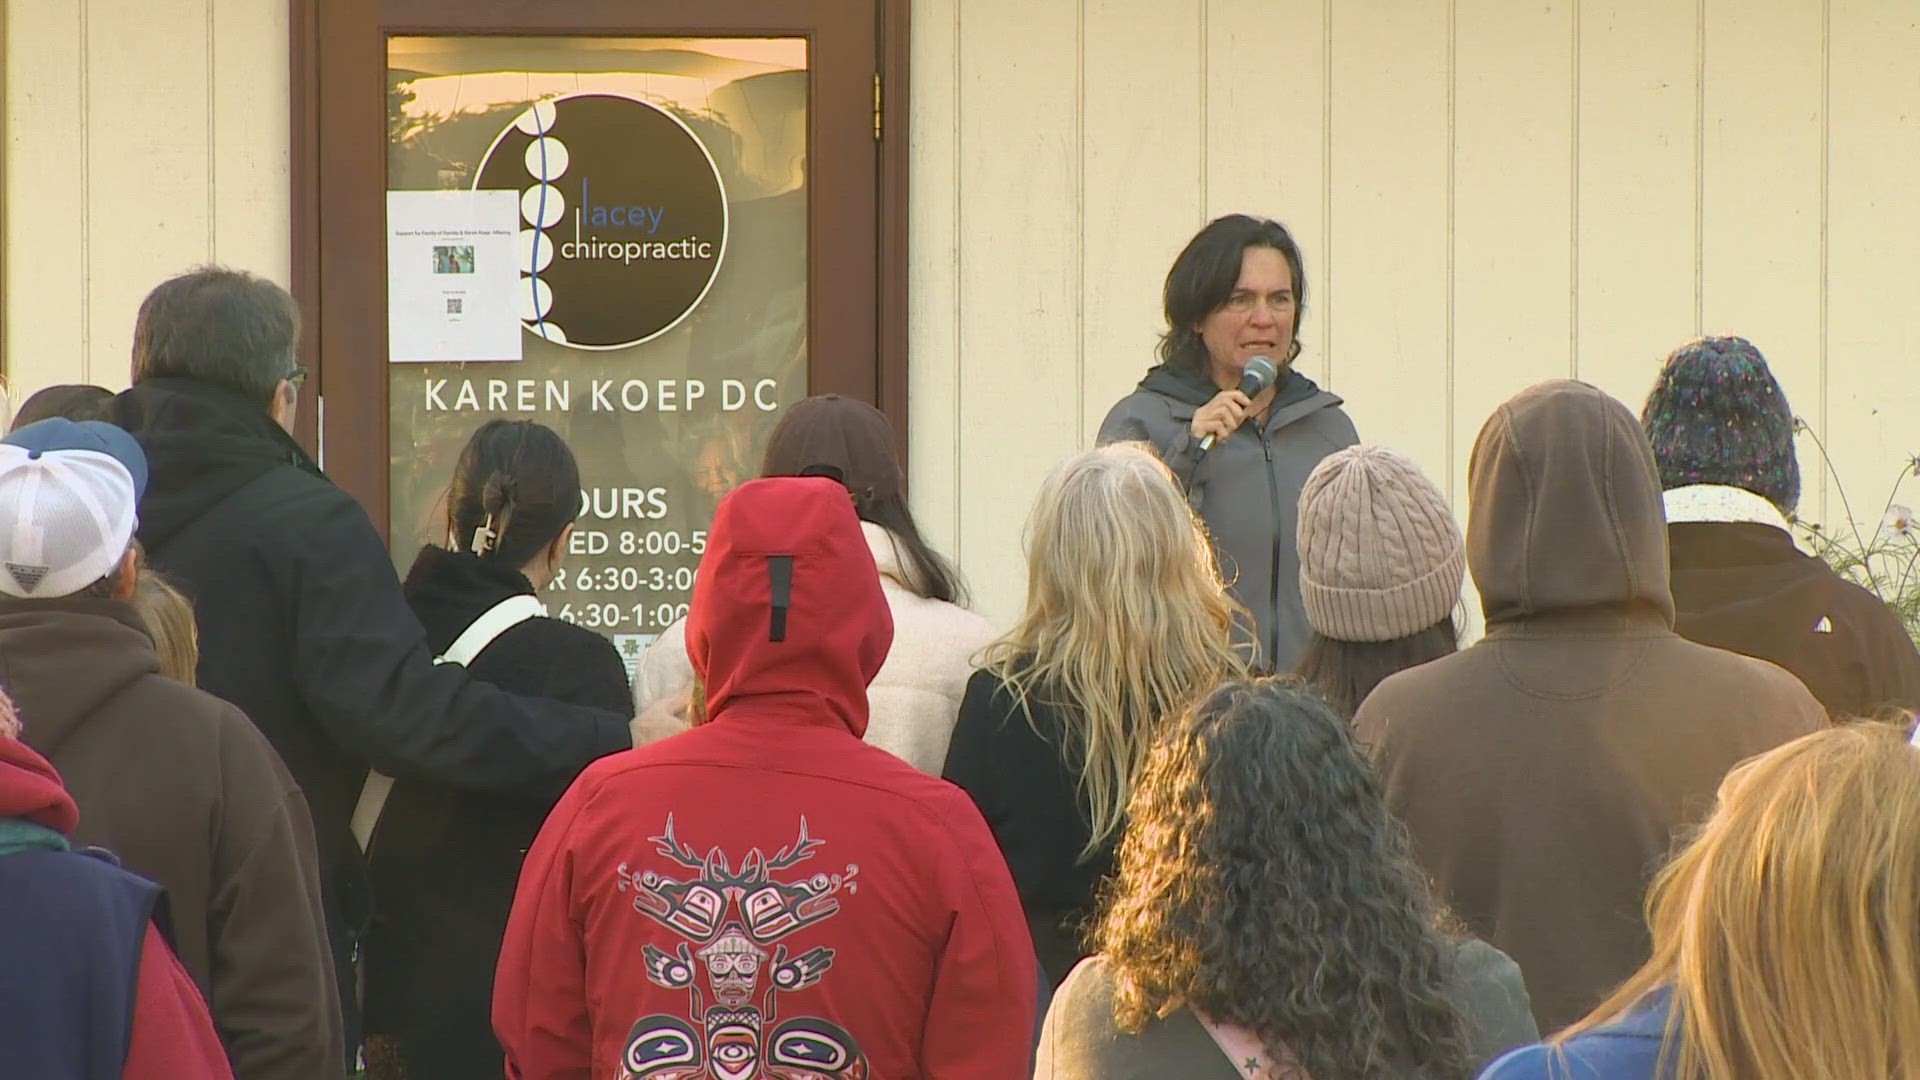 Friends and family gathered outside Karen Koep's chiropractic clinic for a candlelight vigil on Sunday afternoon.